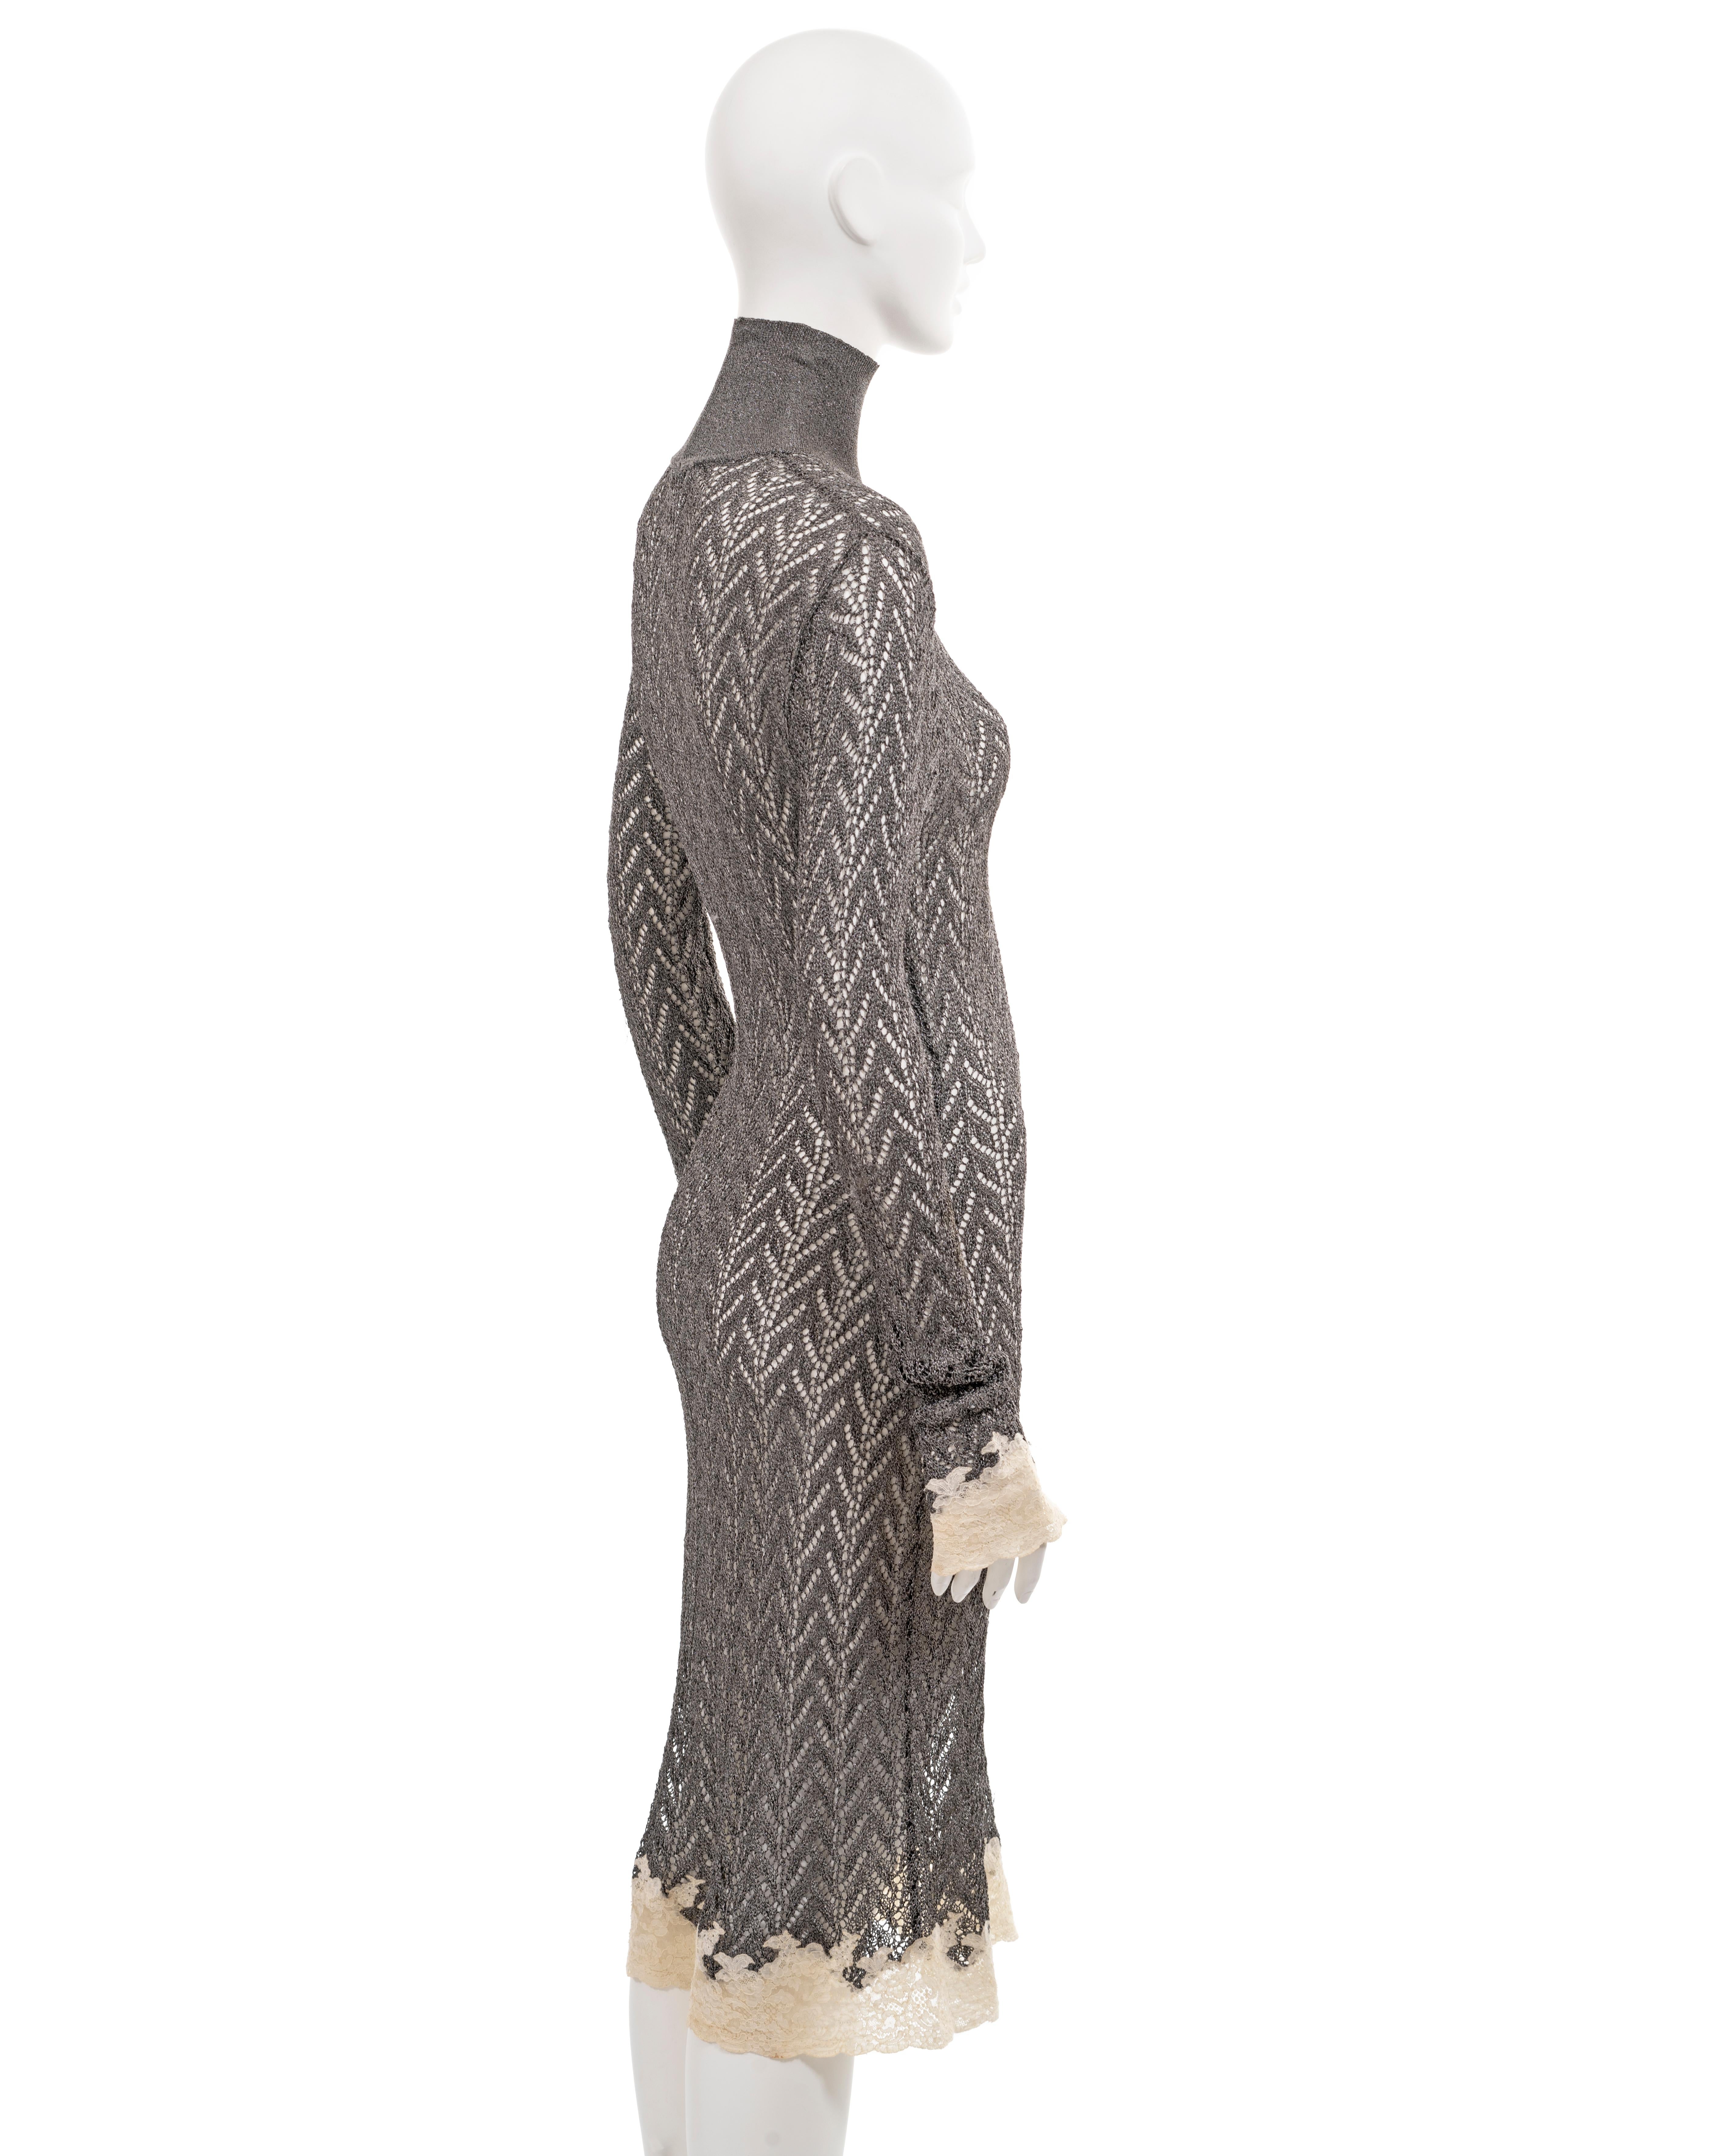 Christian Dior by John Galliano silver open-knit dress with lace trim, fw 1998 For Sale 5